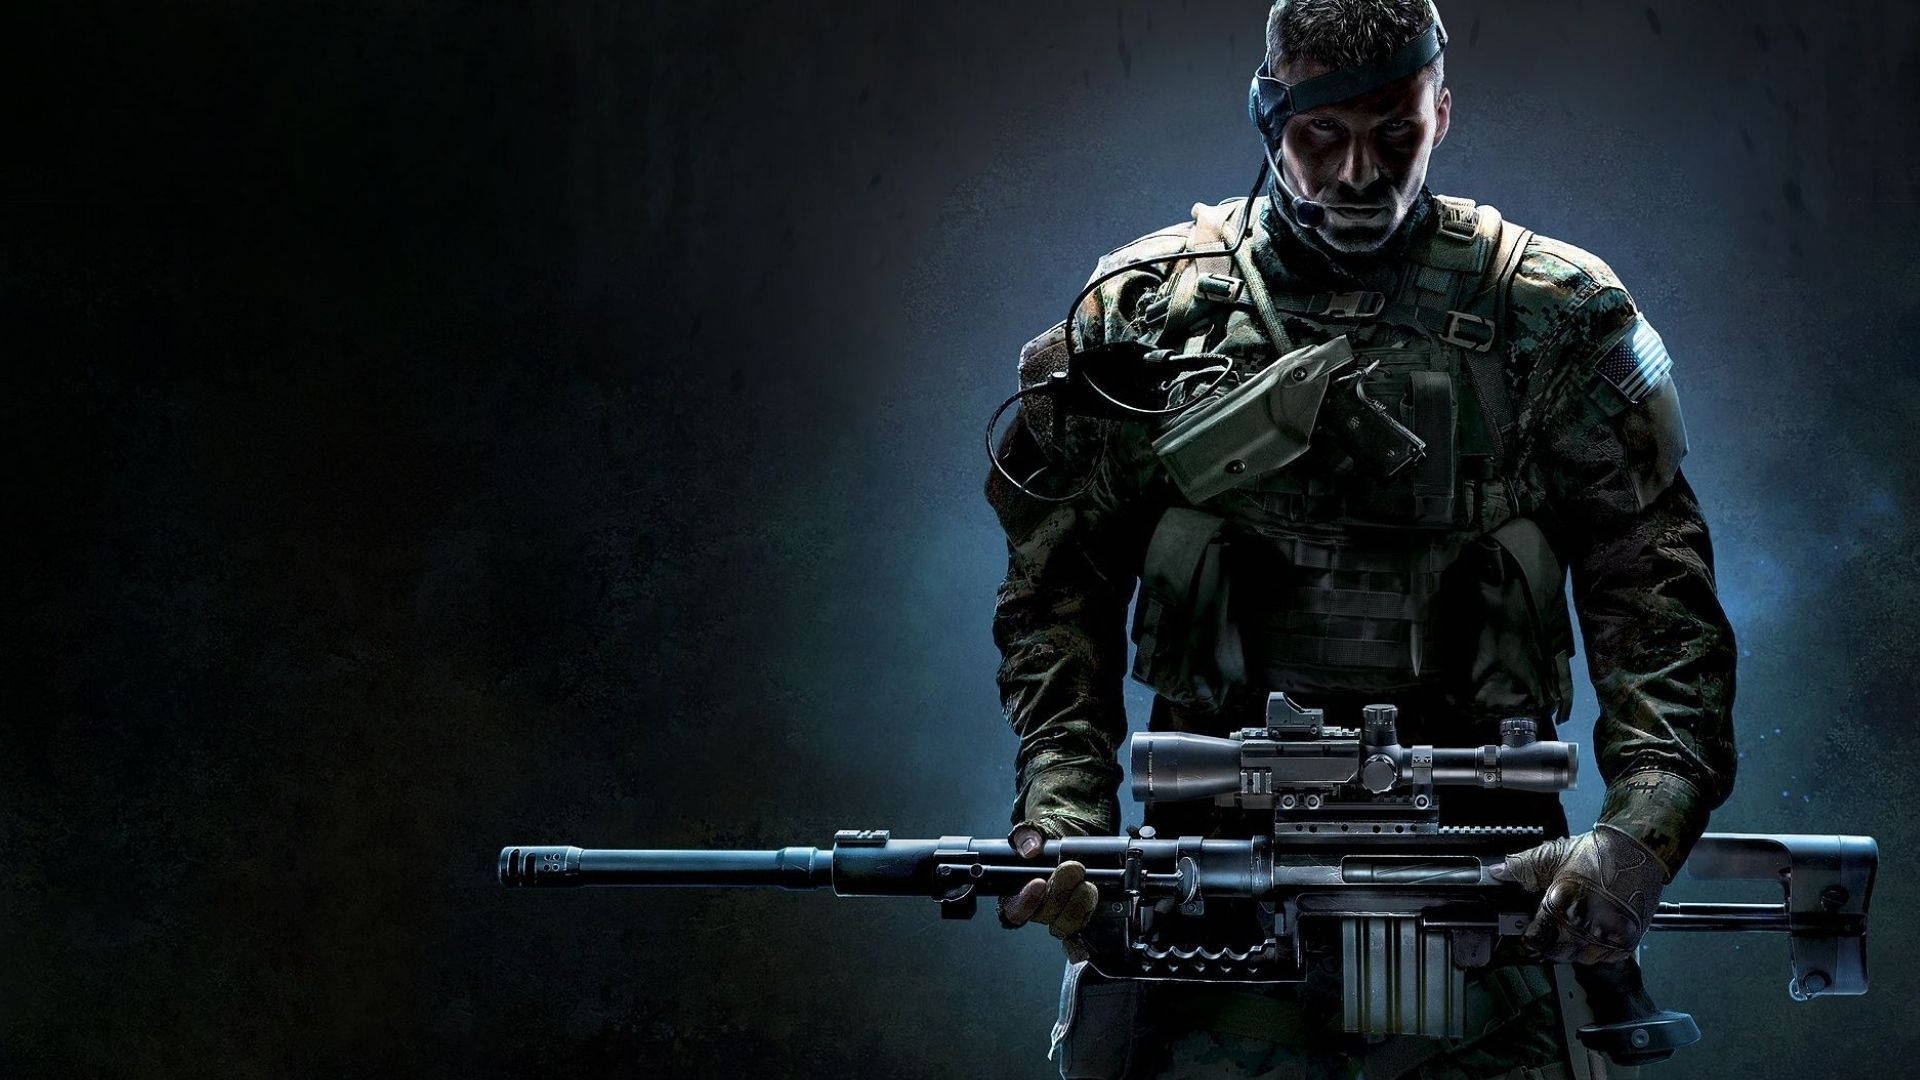 1920x1080 Download Sniper Army Soldier Wallpaper